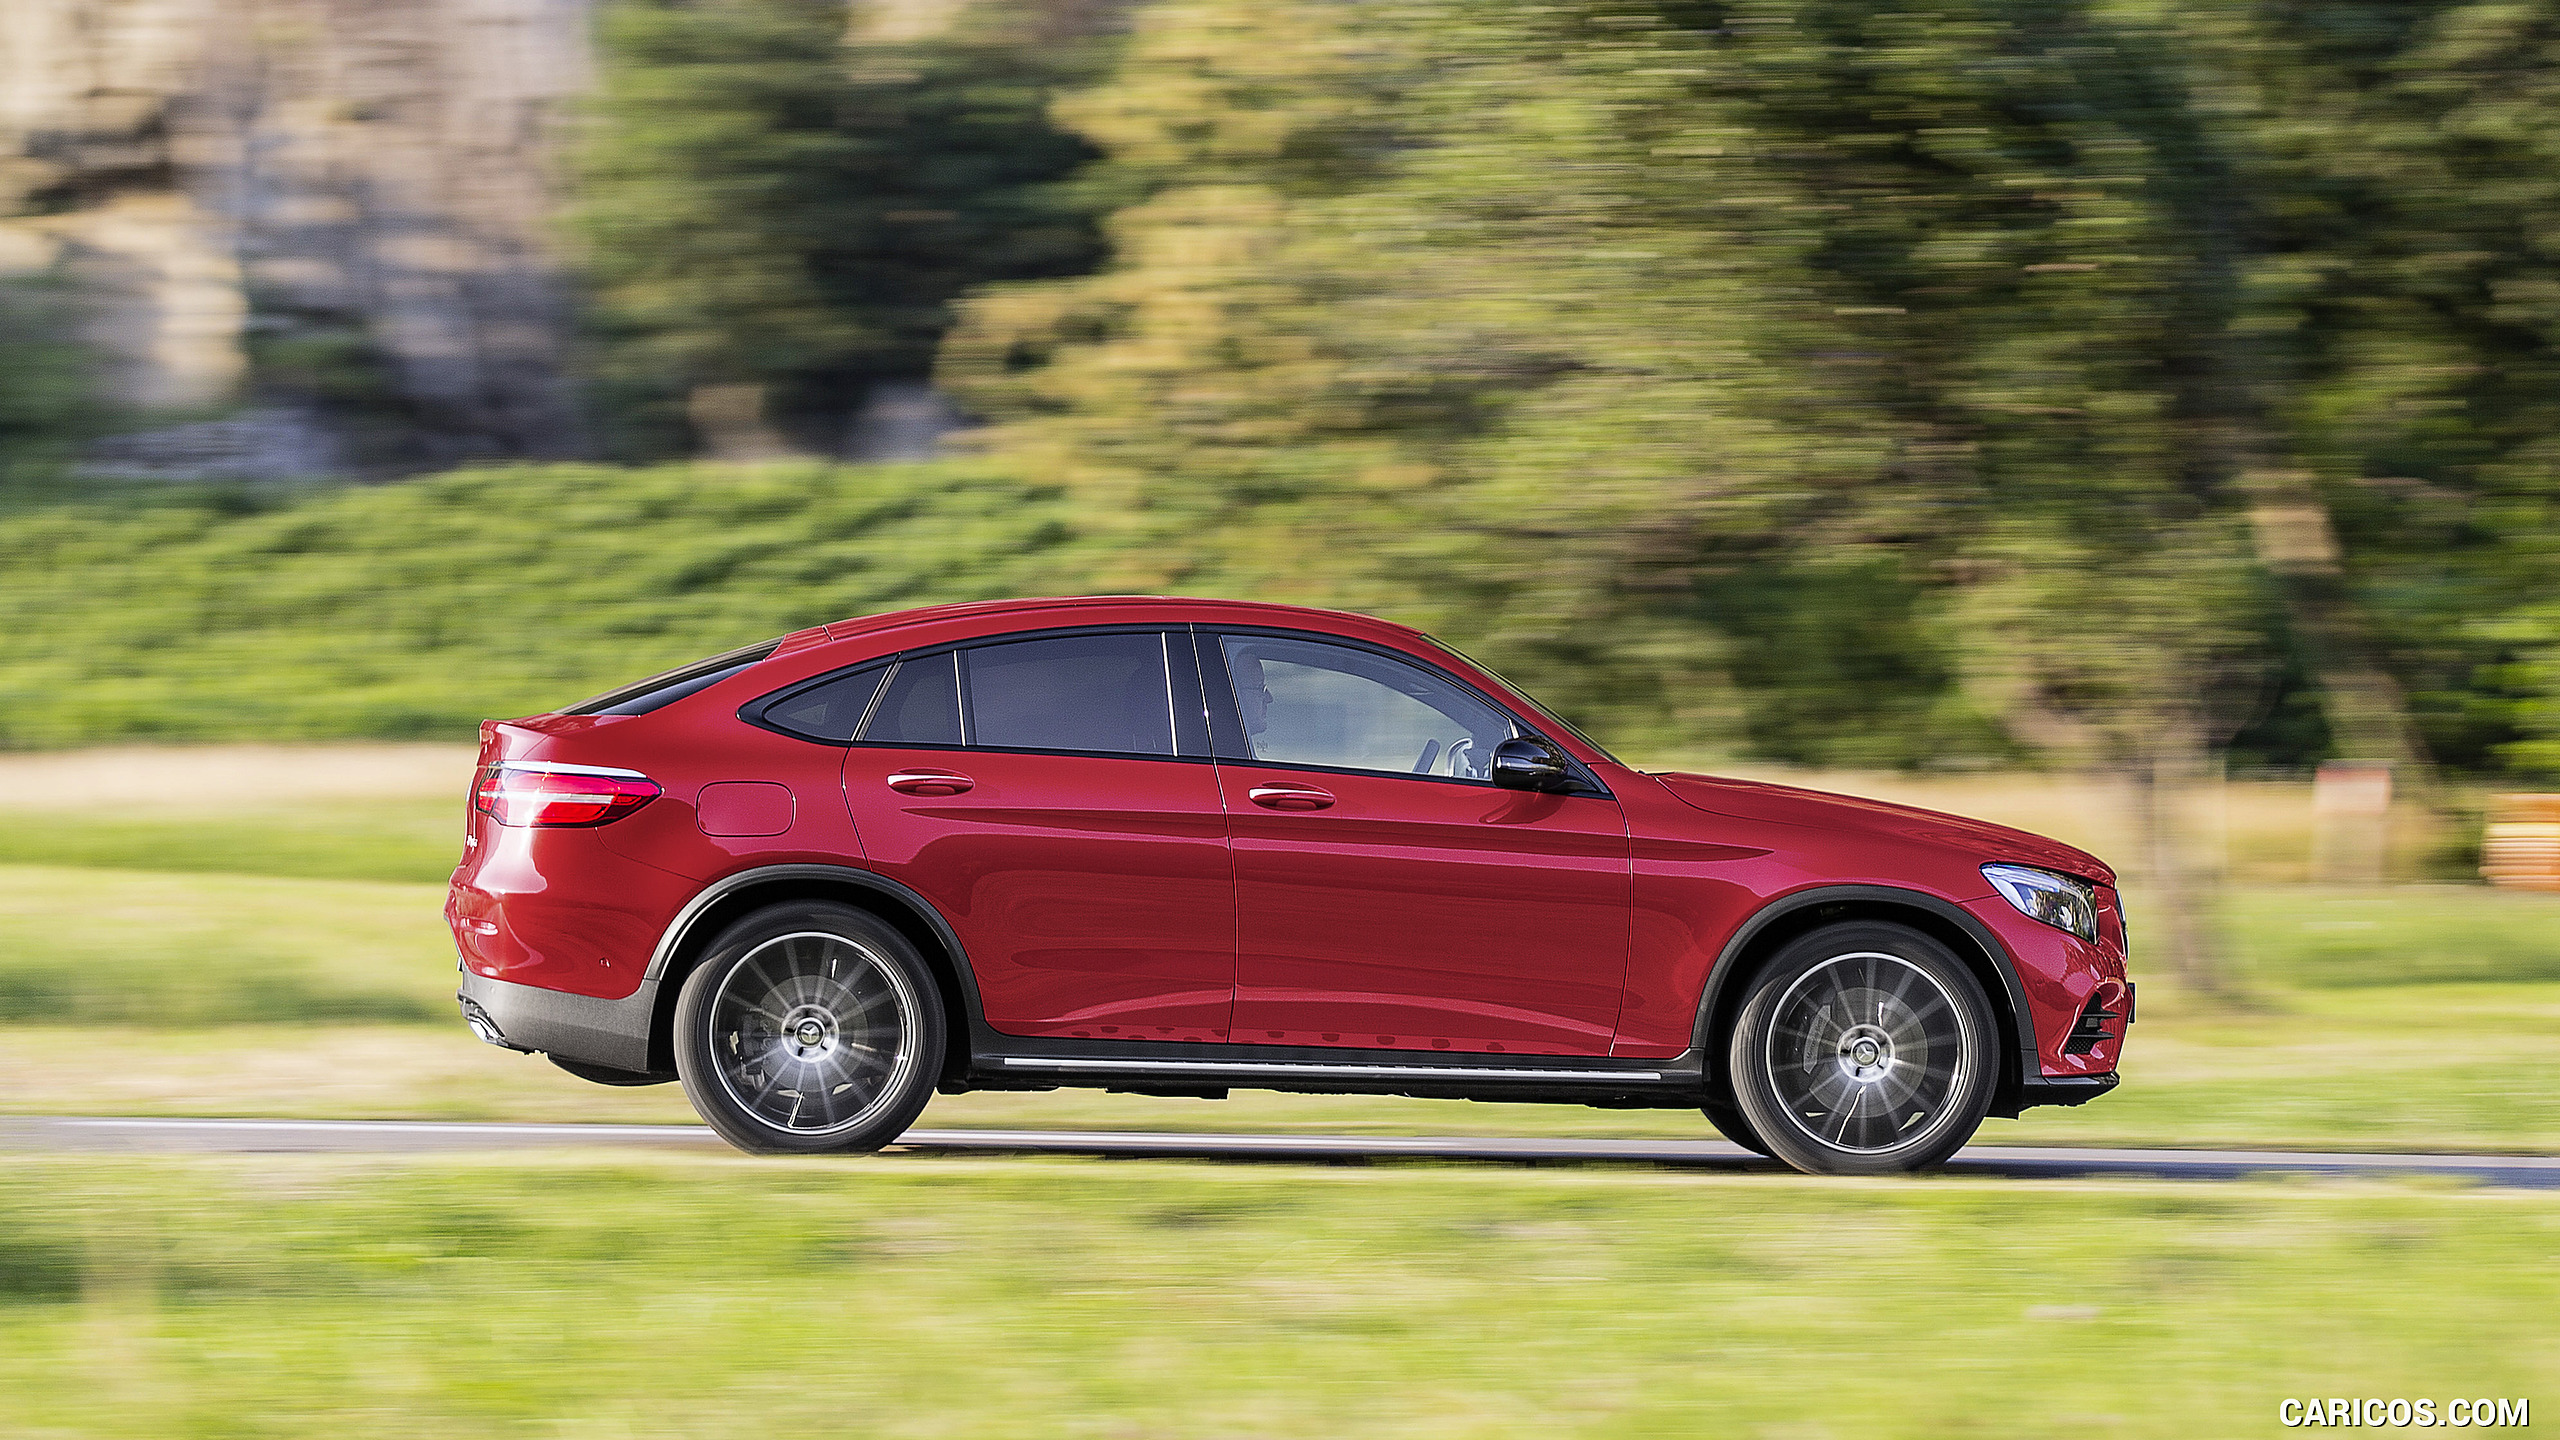 2017 Mercedes-Benz GLC 350 d Coupe (Diesel; Color: Hyacinth Red) - Side, #87 of 144